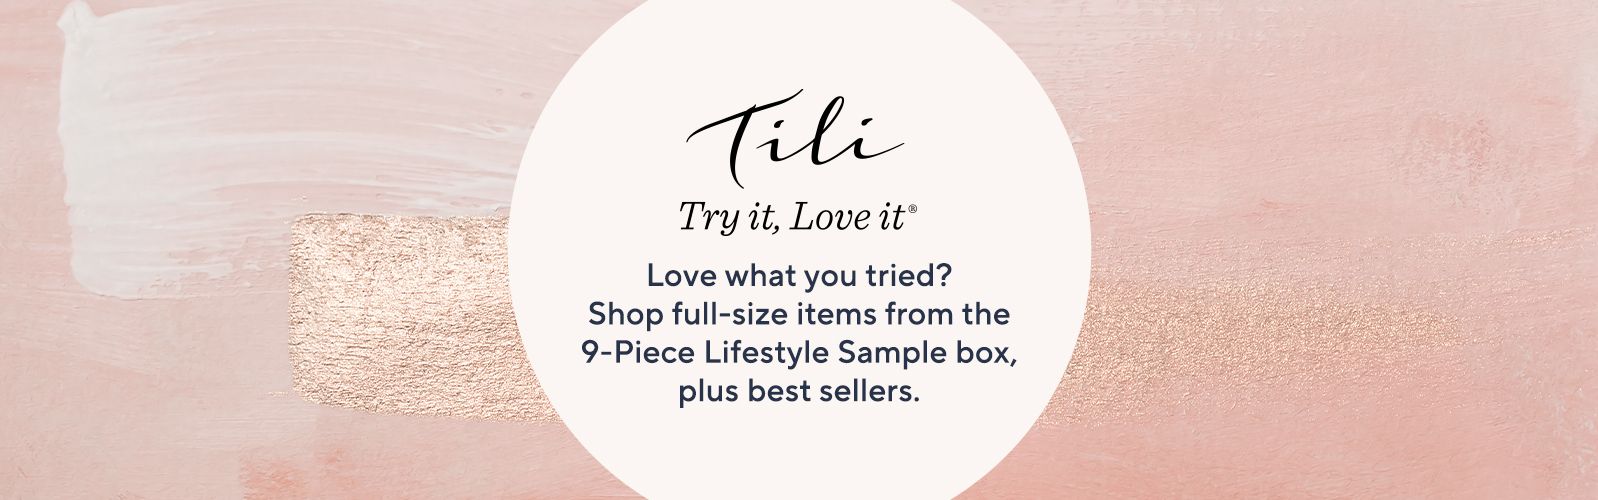 TILI Try it, Love it Love what you tried? Shop full-size items from the 9-Piece Lifestyle Sample box, plus best sellers.